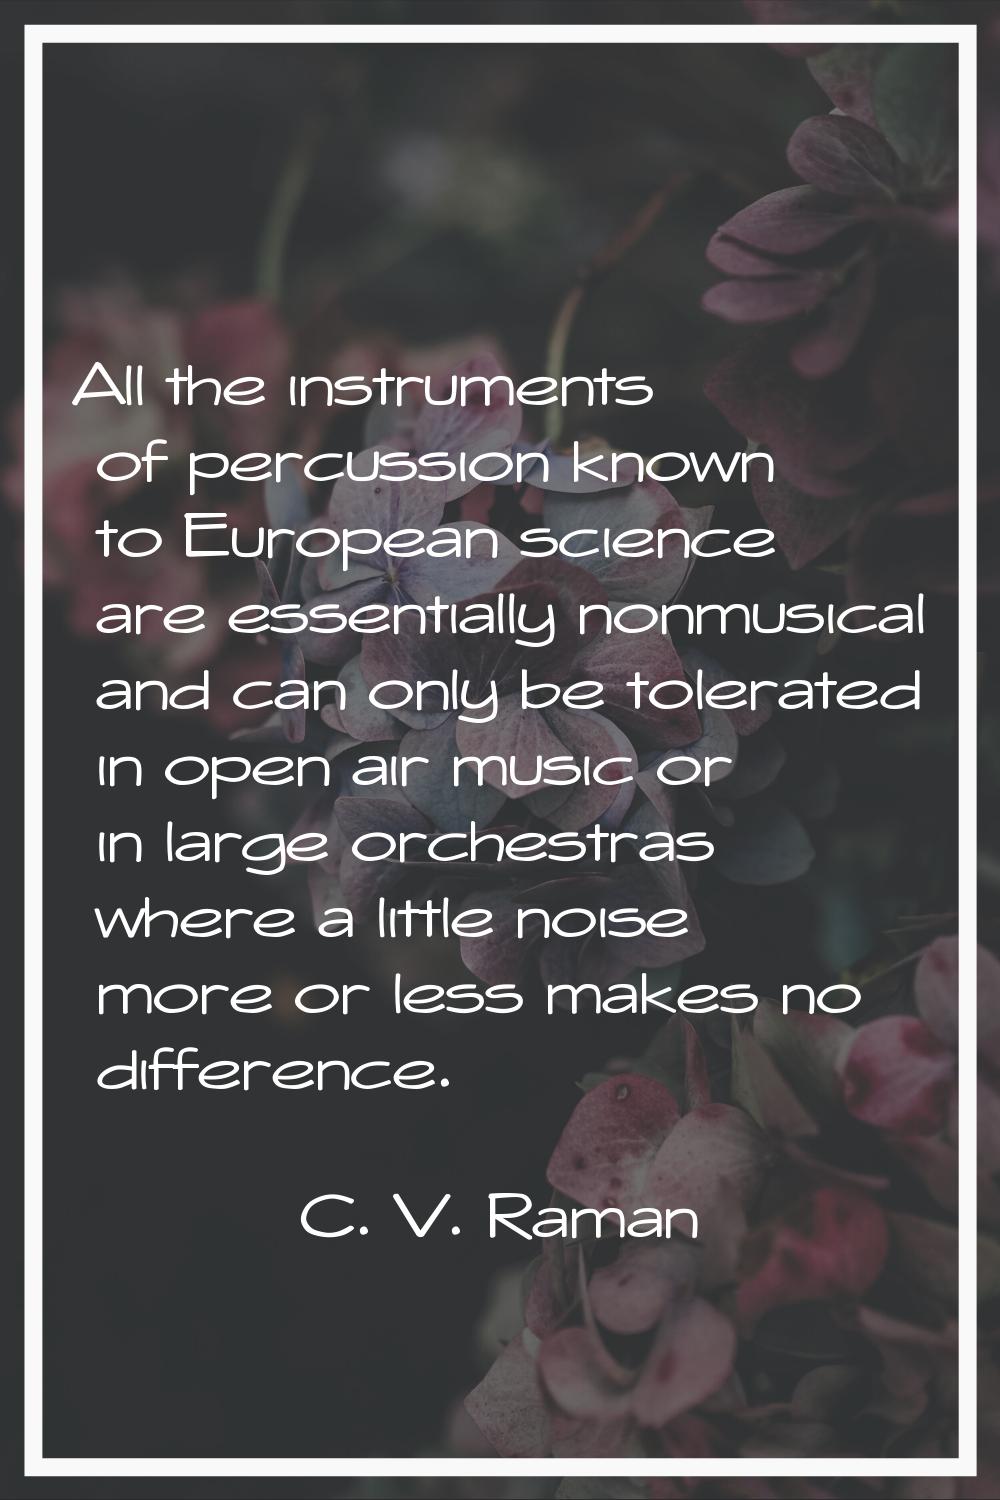 All the instruments of percussion known to European science are essentially nonmusical and can only